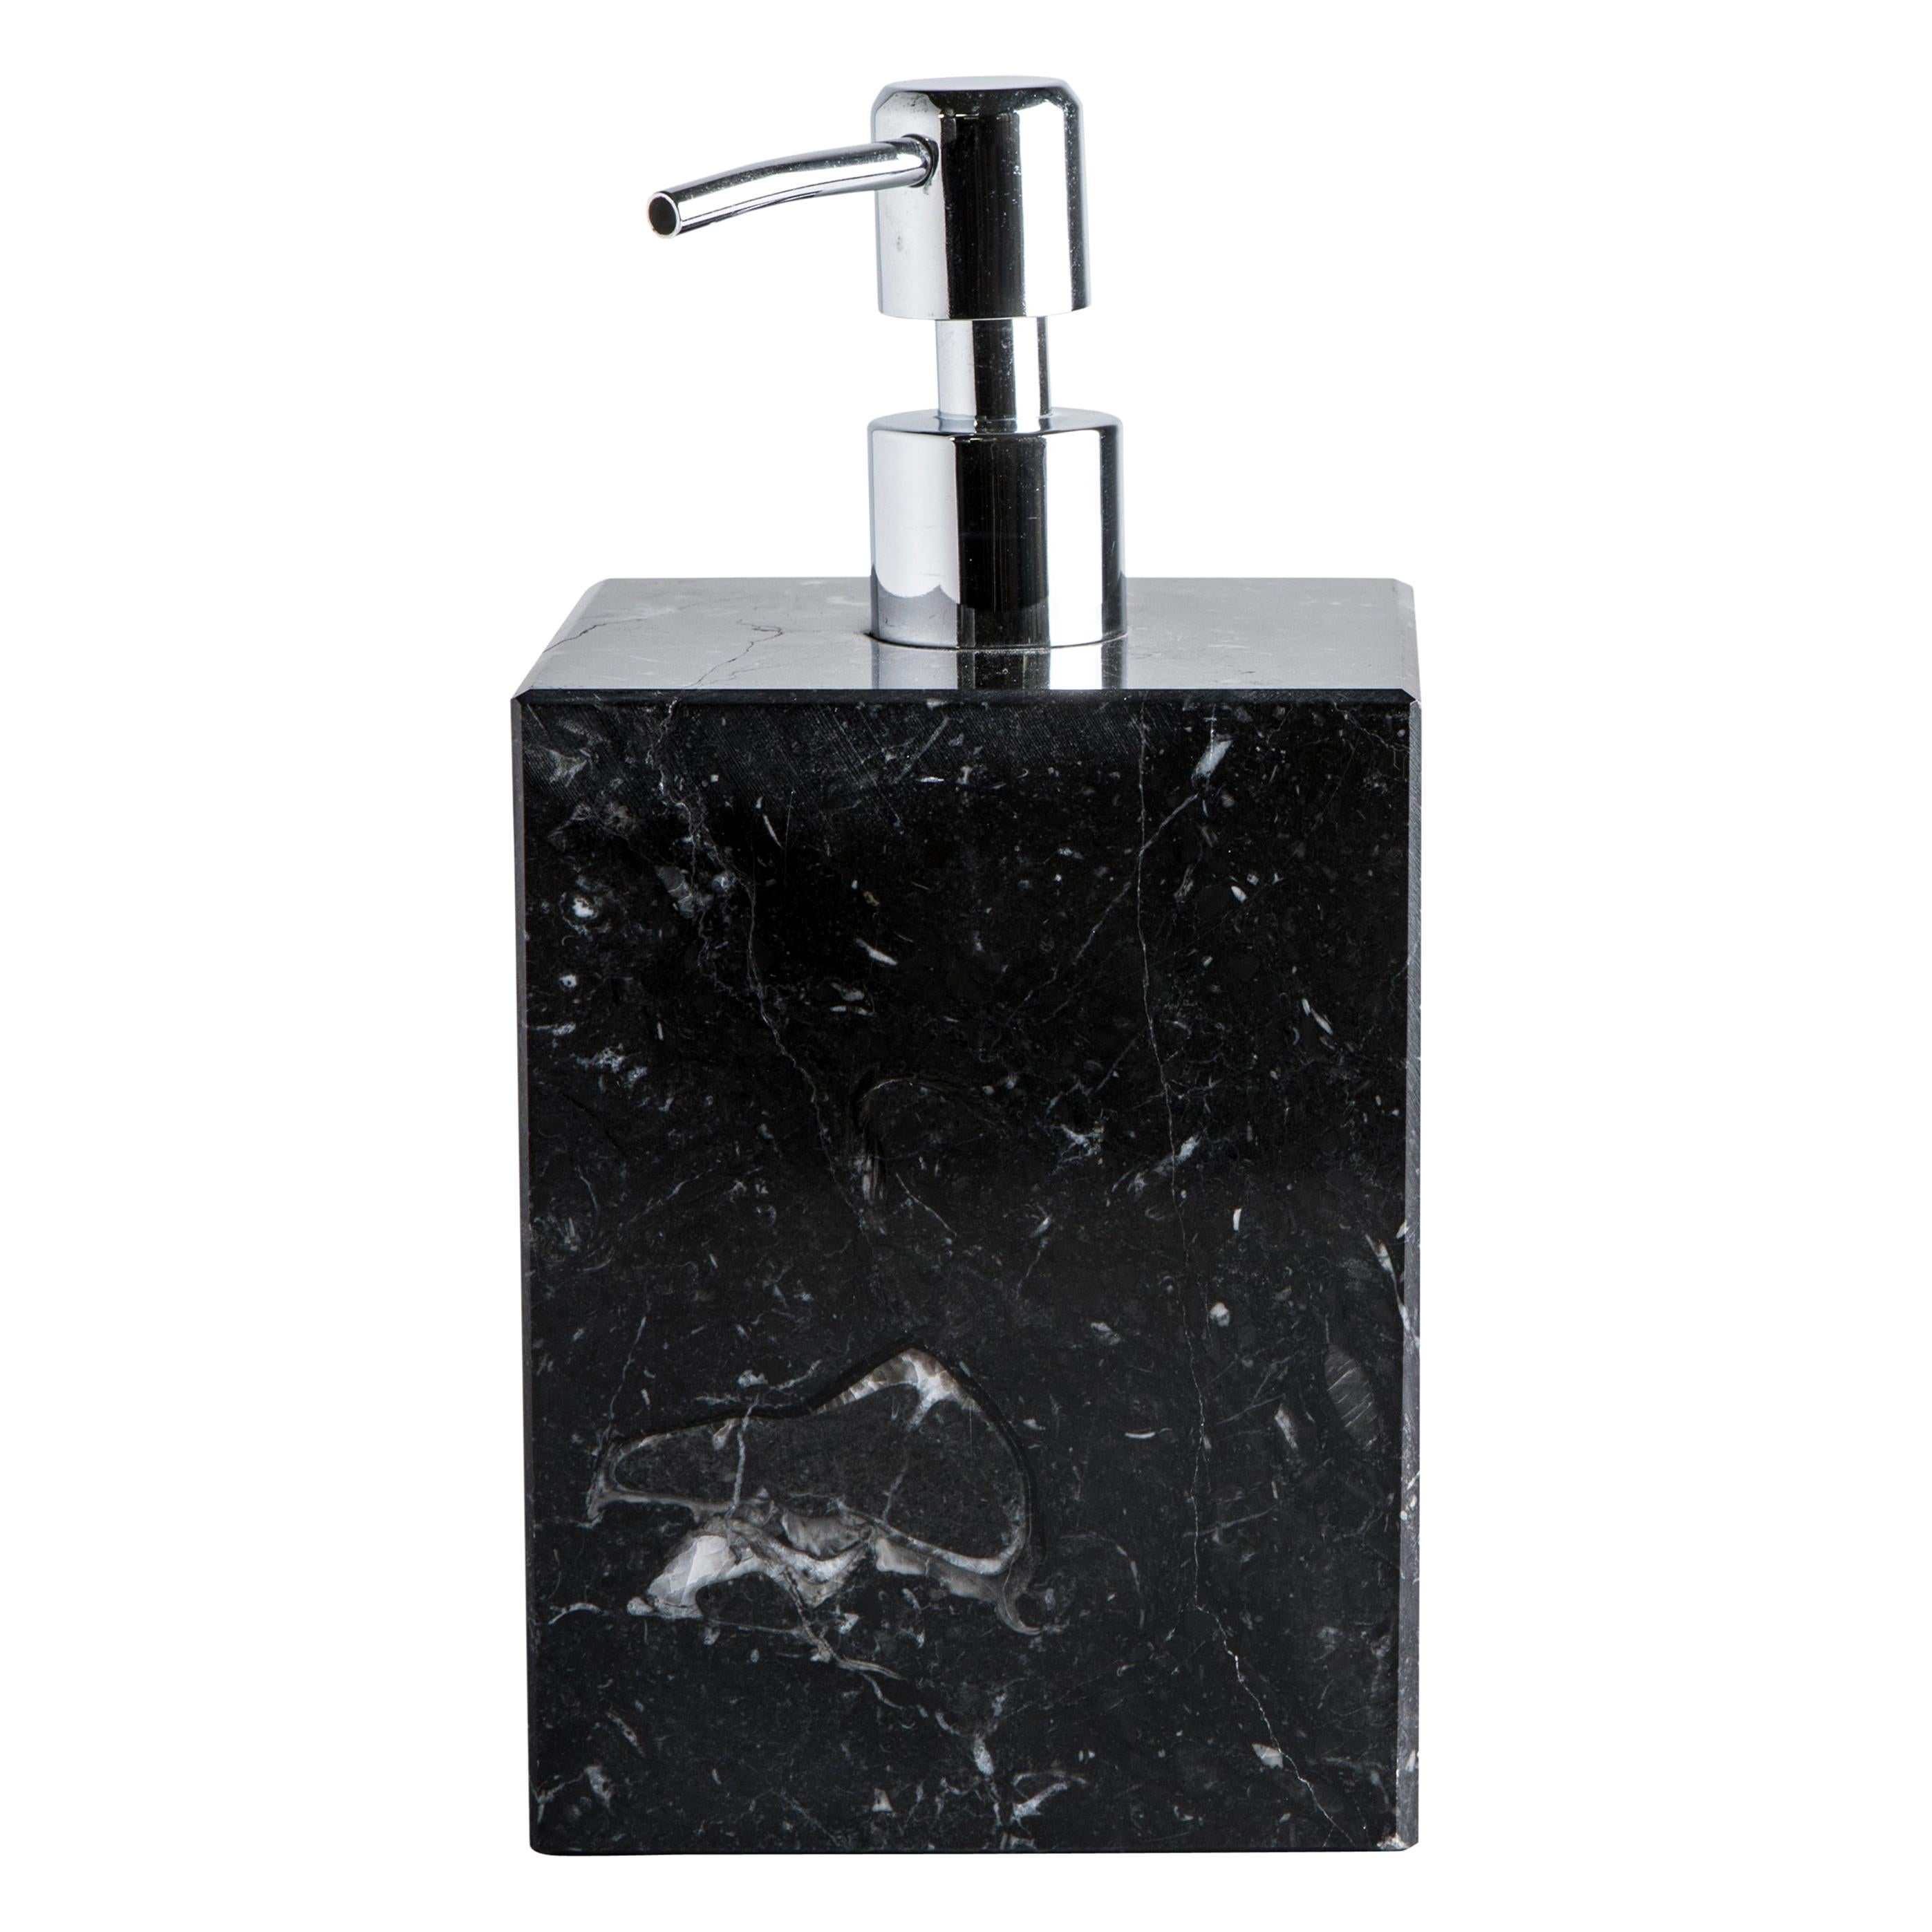 Handmade Squared Soap Dispenser in Black Marquina Marble For Sale